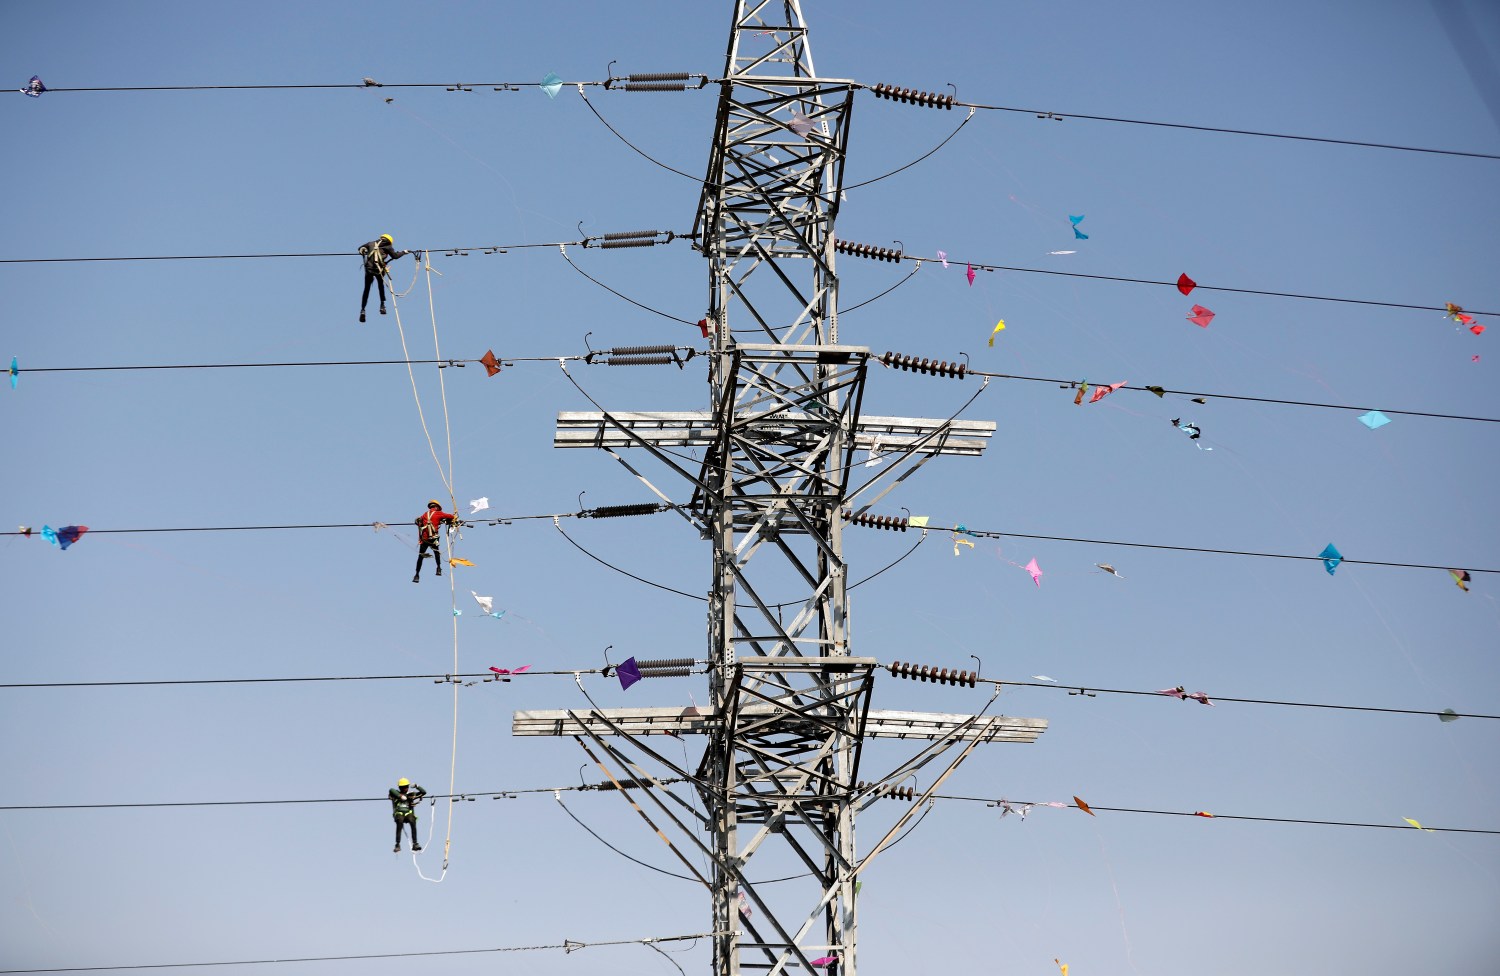 Workers of Torrent Power Limited remove kites and thread tangled up in electric power cables after the end of the kite flying season in Ahmedabad, India, January 16, 2020. REUTERS/Amit Dave     TPX IMAGES OF THE DAY